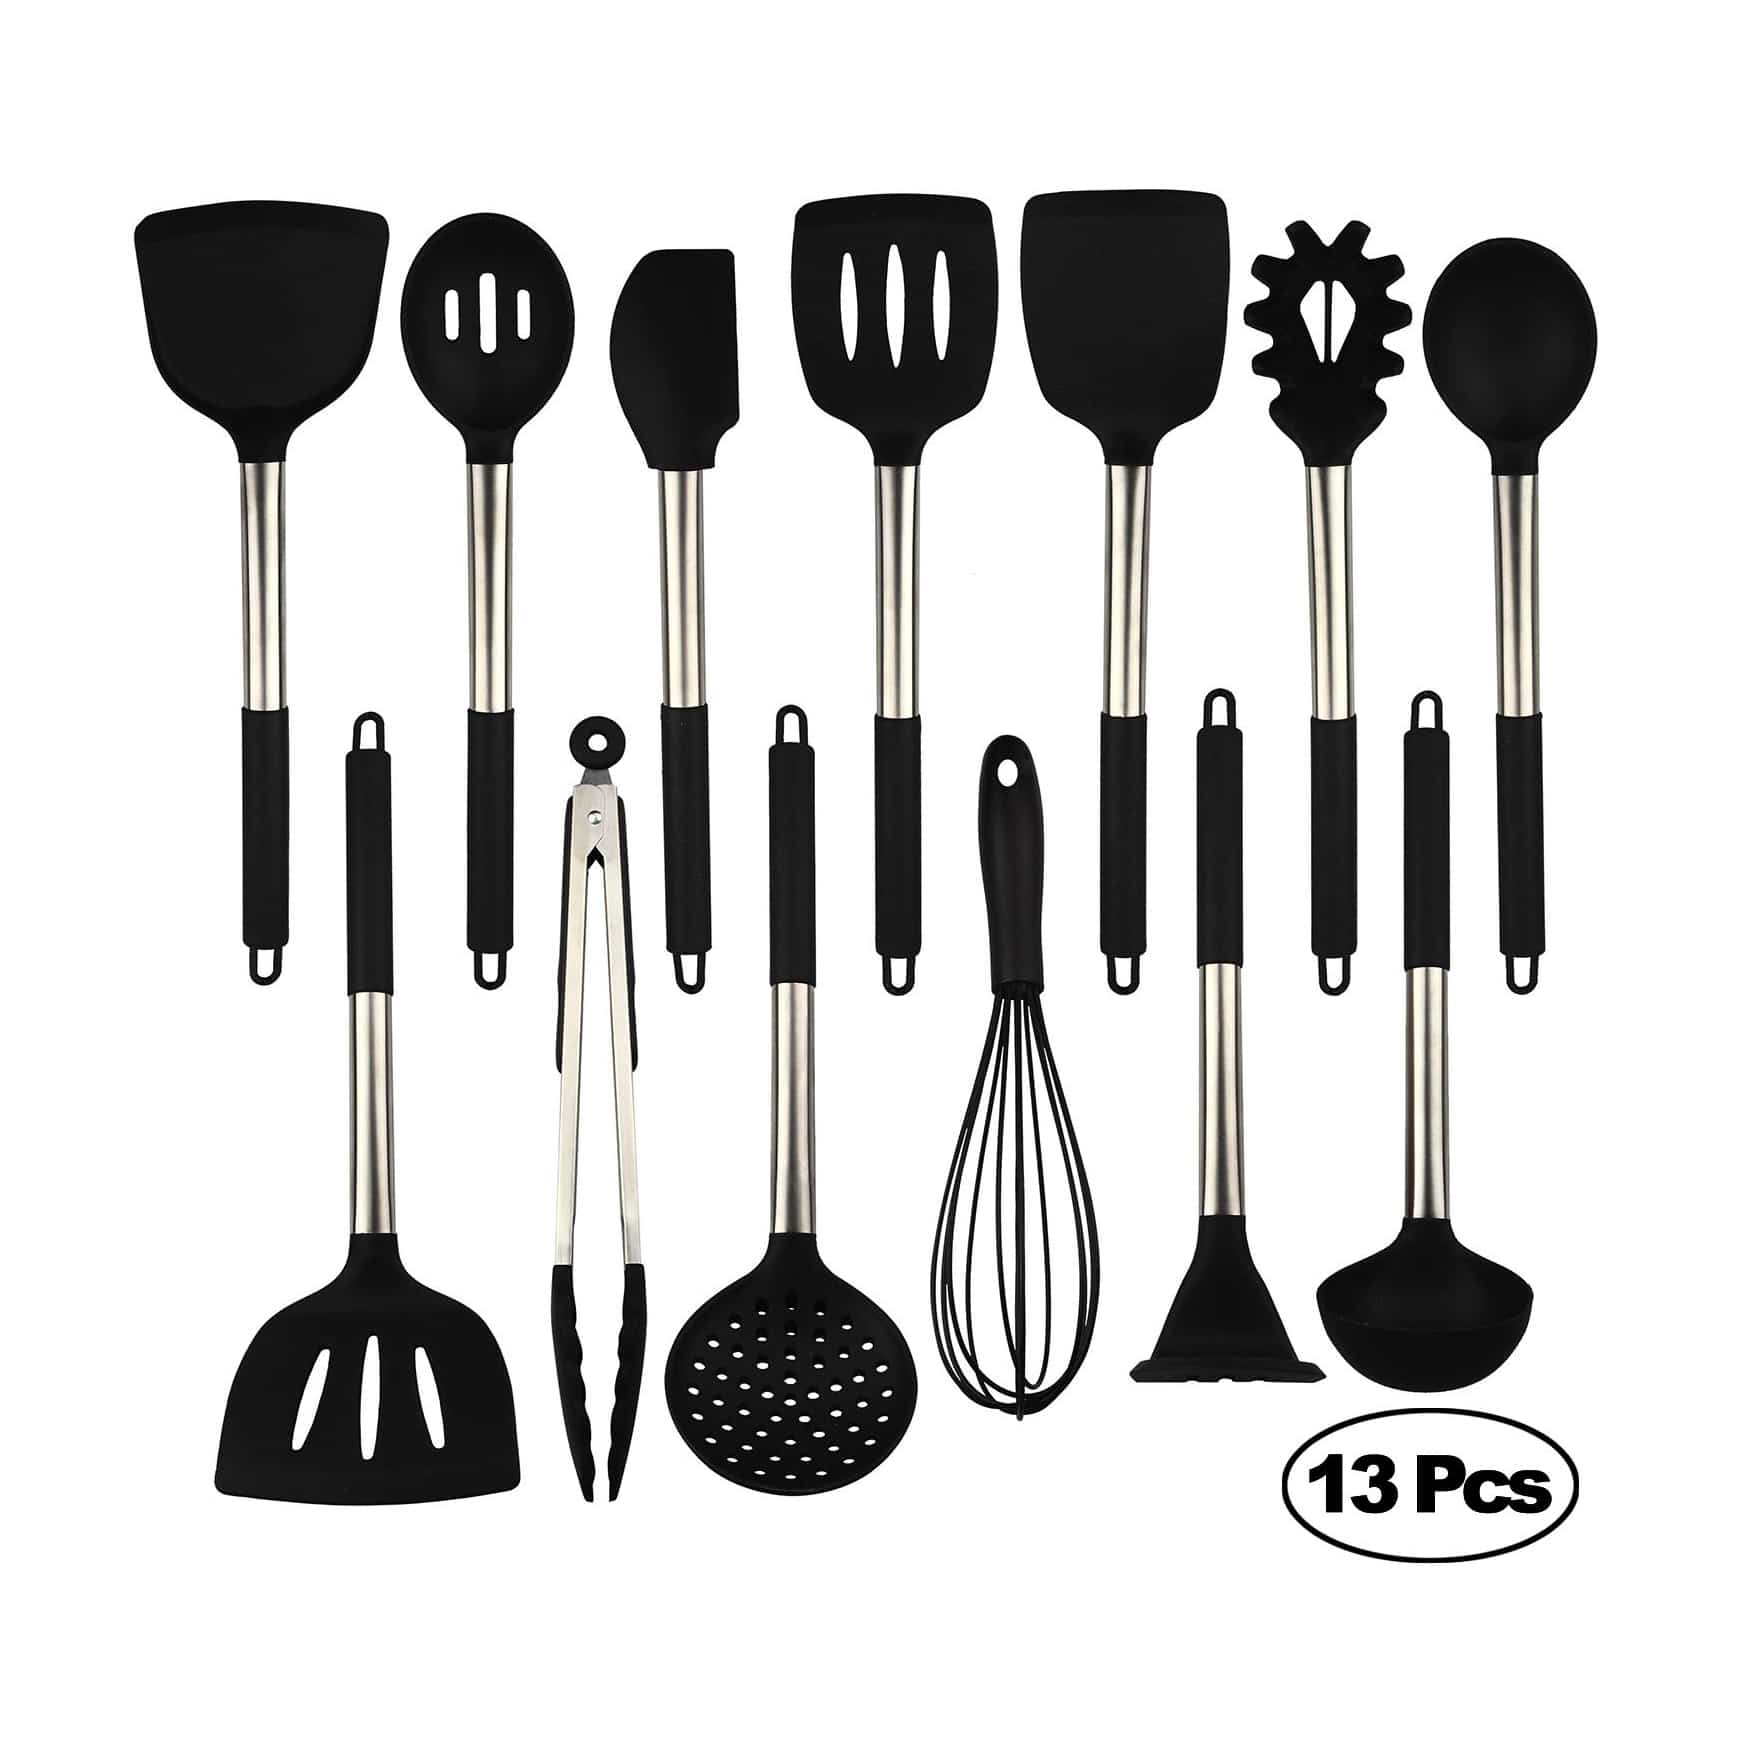 Top 10 Best Silicone Cooking Utensils in 2021 Reviews Guide